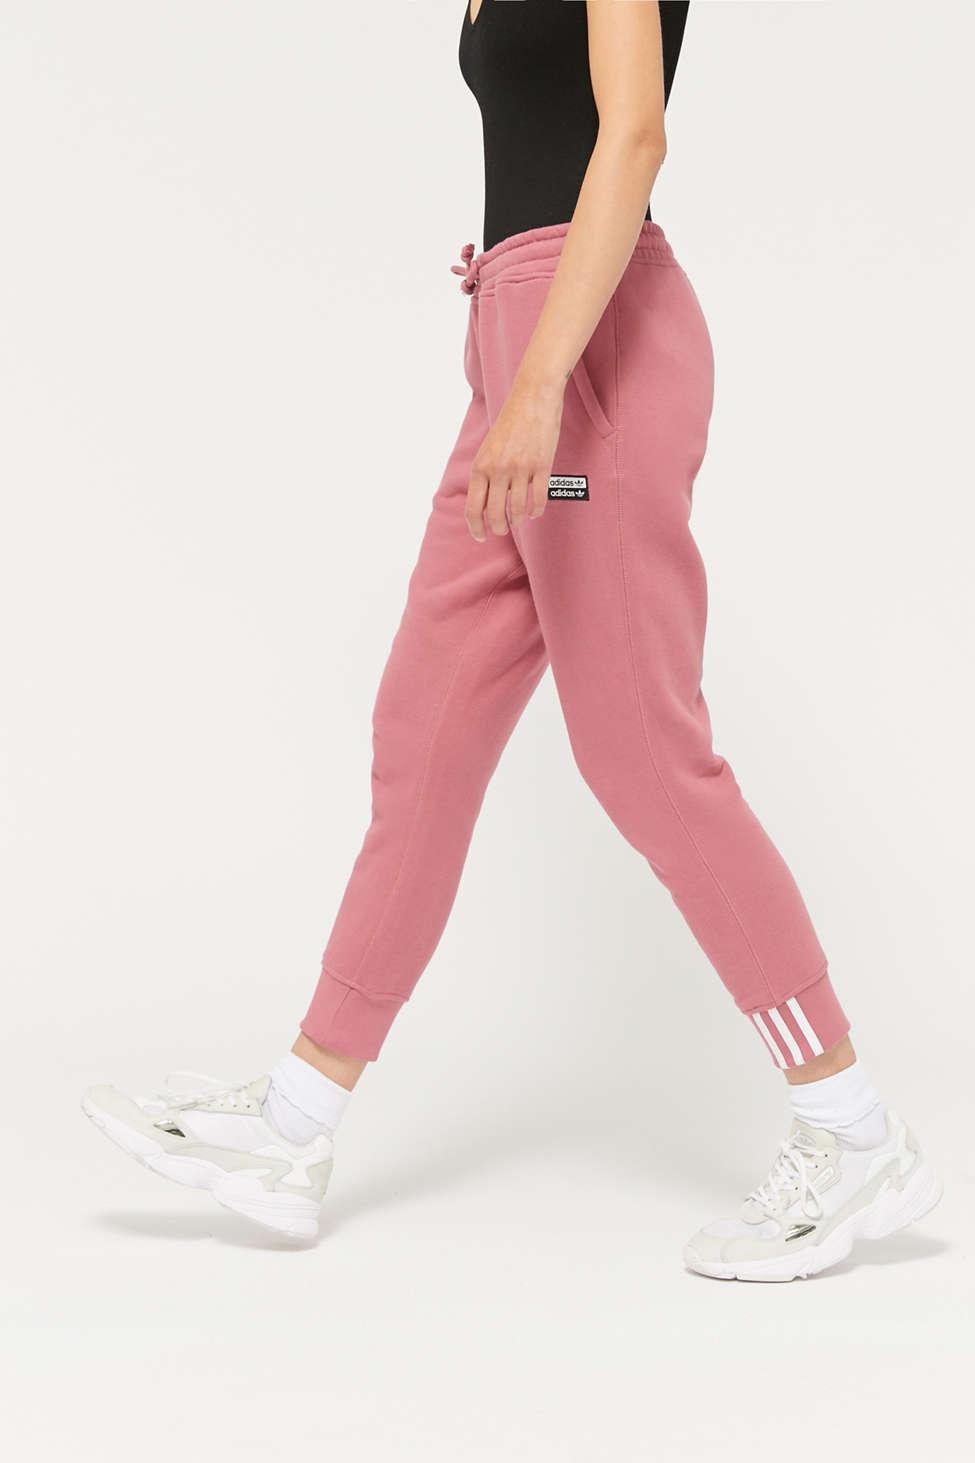 urban outfitters adidas joggers